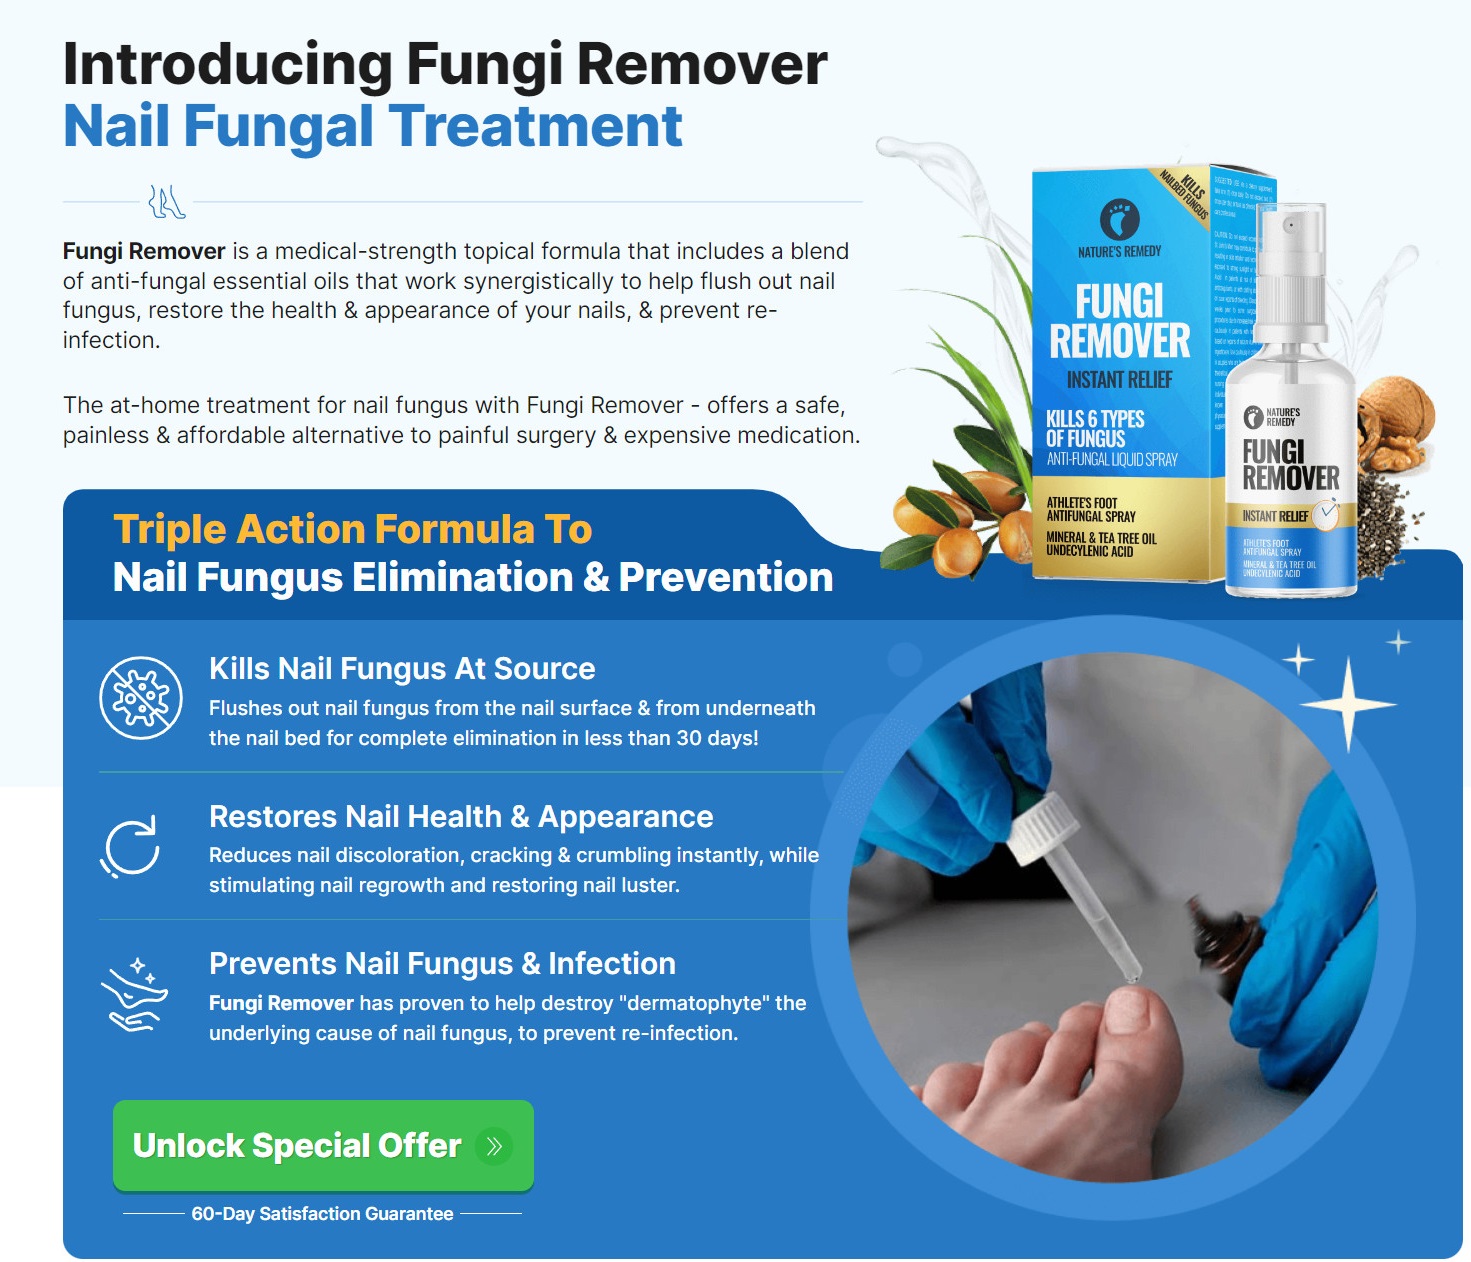 Nature's Remedy Fungi Remover AU, NZ Reviews: How Does It Work For Nail  Fungus? - General Discussion - Tt Community